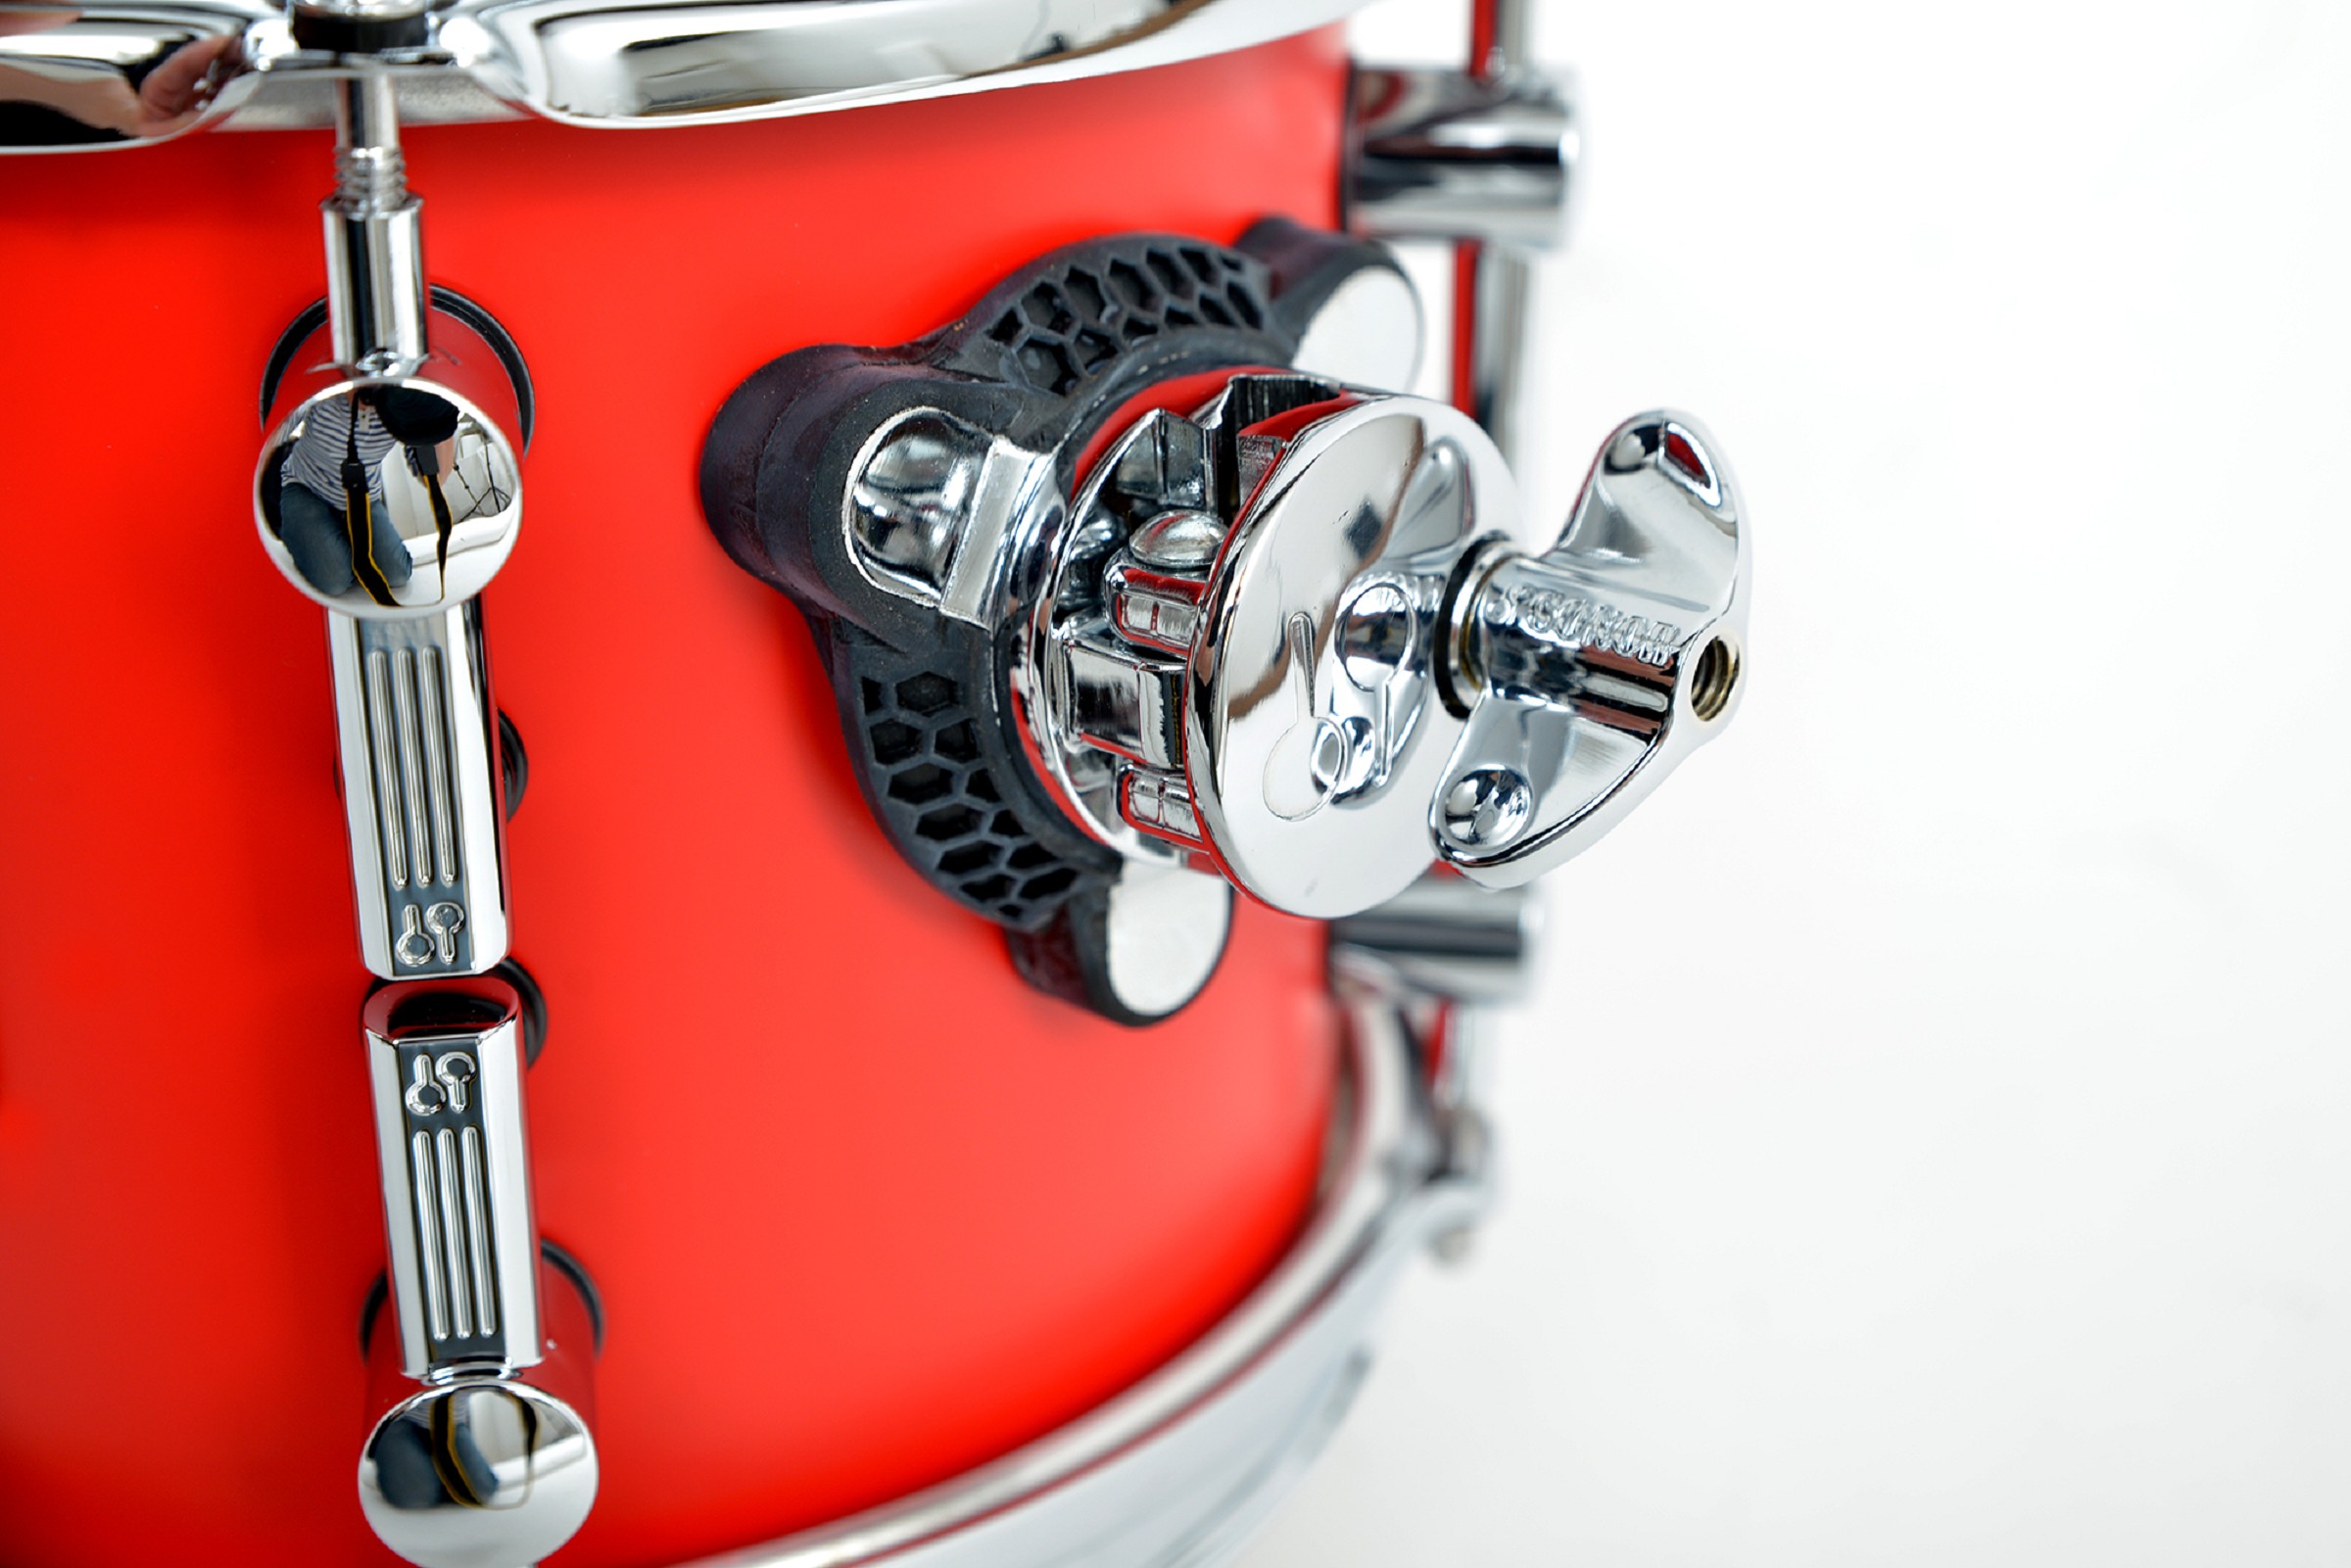 Sonor SQ1 8x7 Tom Tom Hot Rod Red